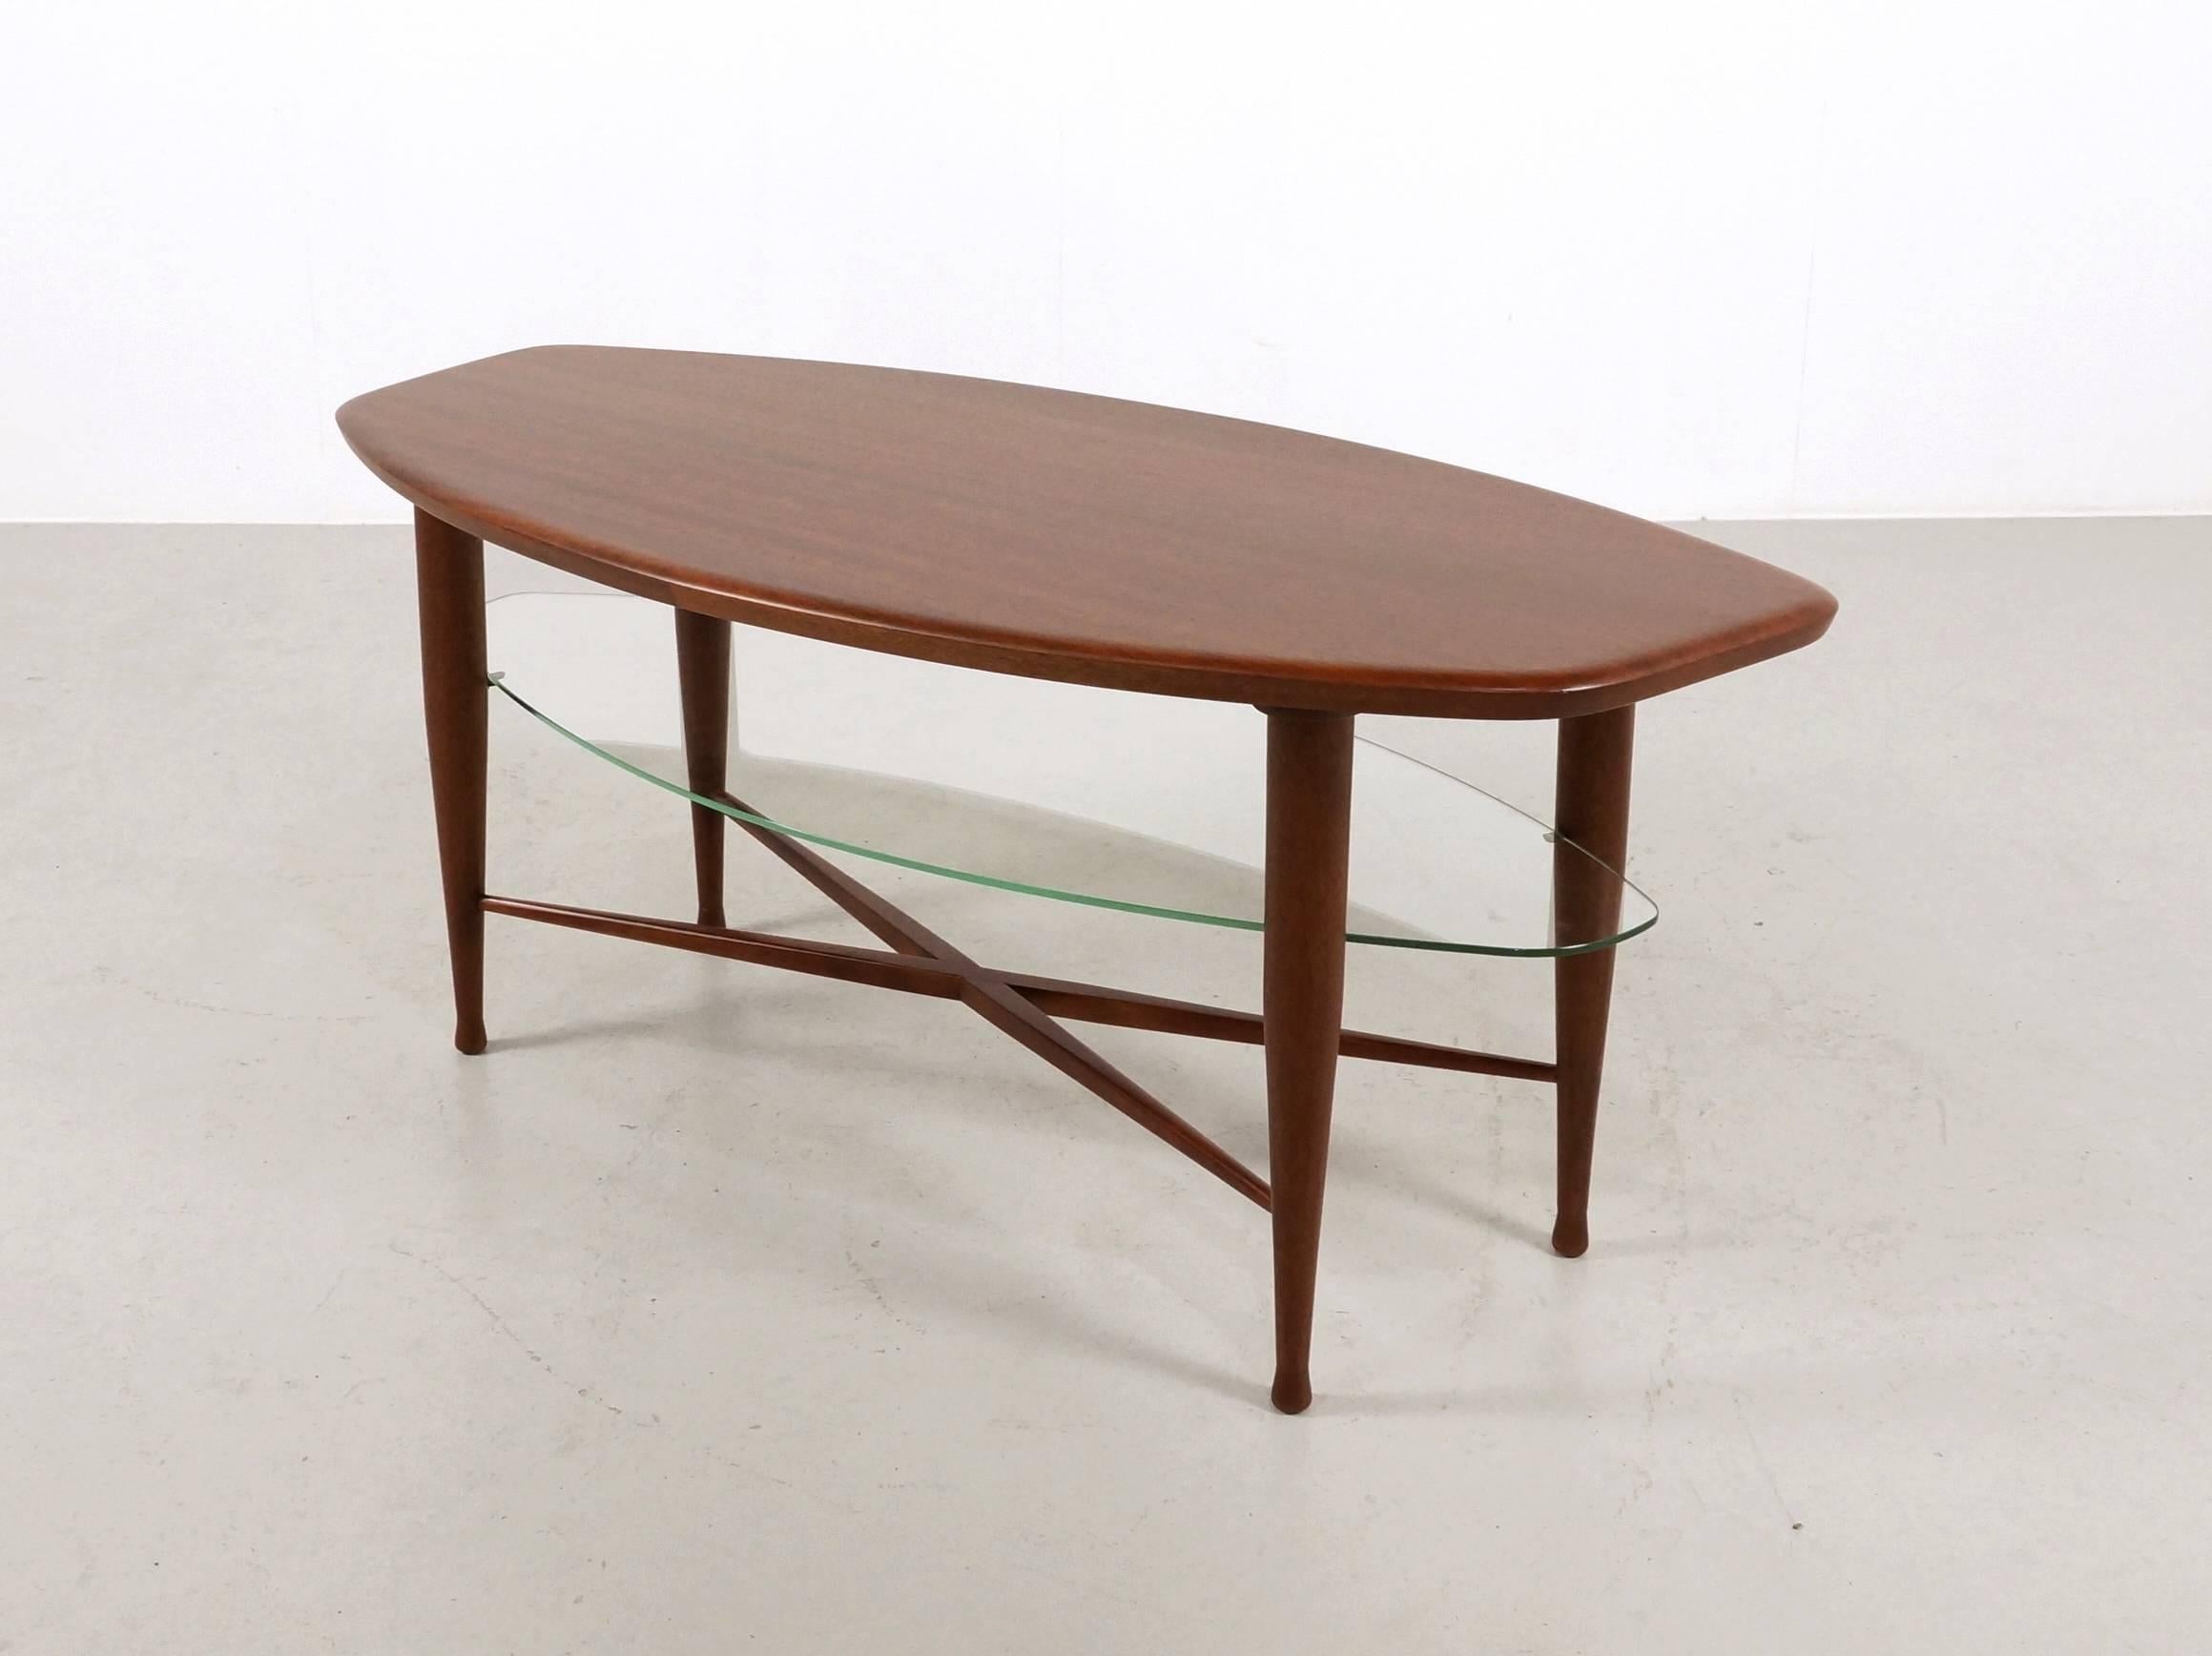 Teak Coffee Table with Glass Magazine Shelve Underneath For Sale 2